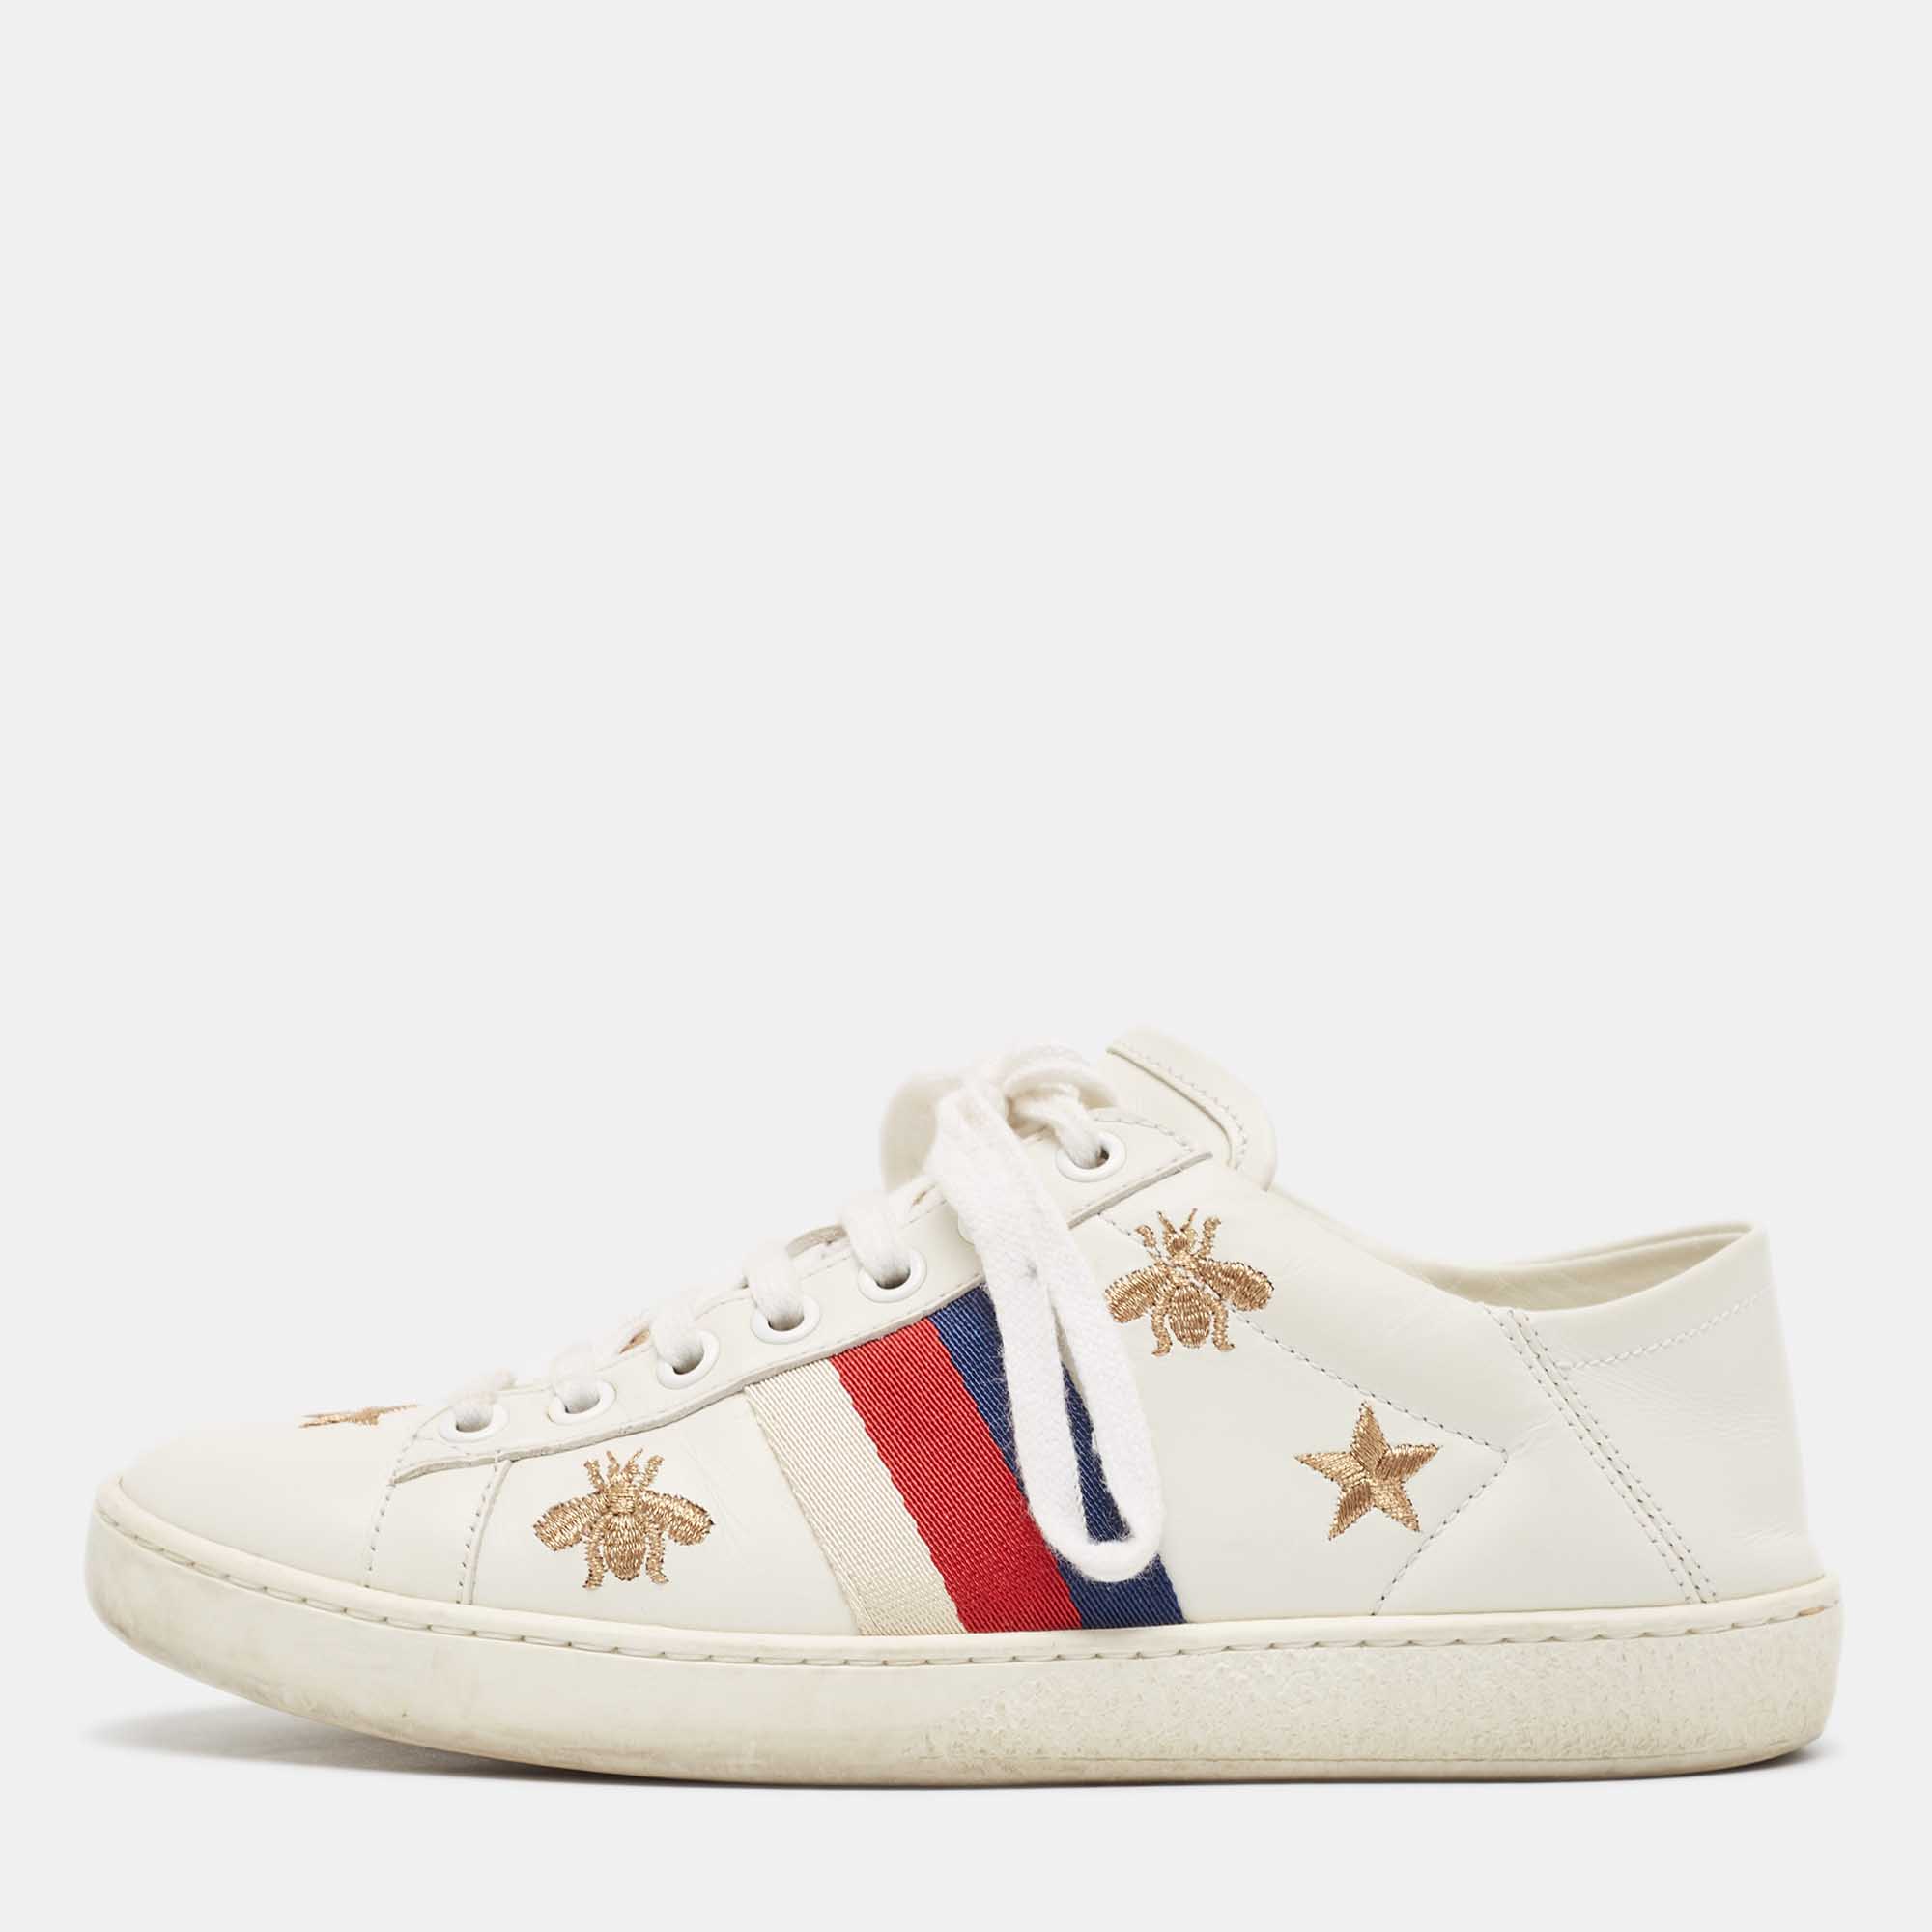 Gucci white leather star ace low top sneakers size 34.5